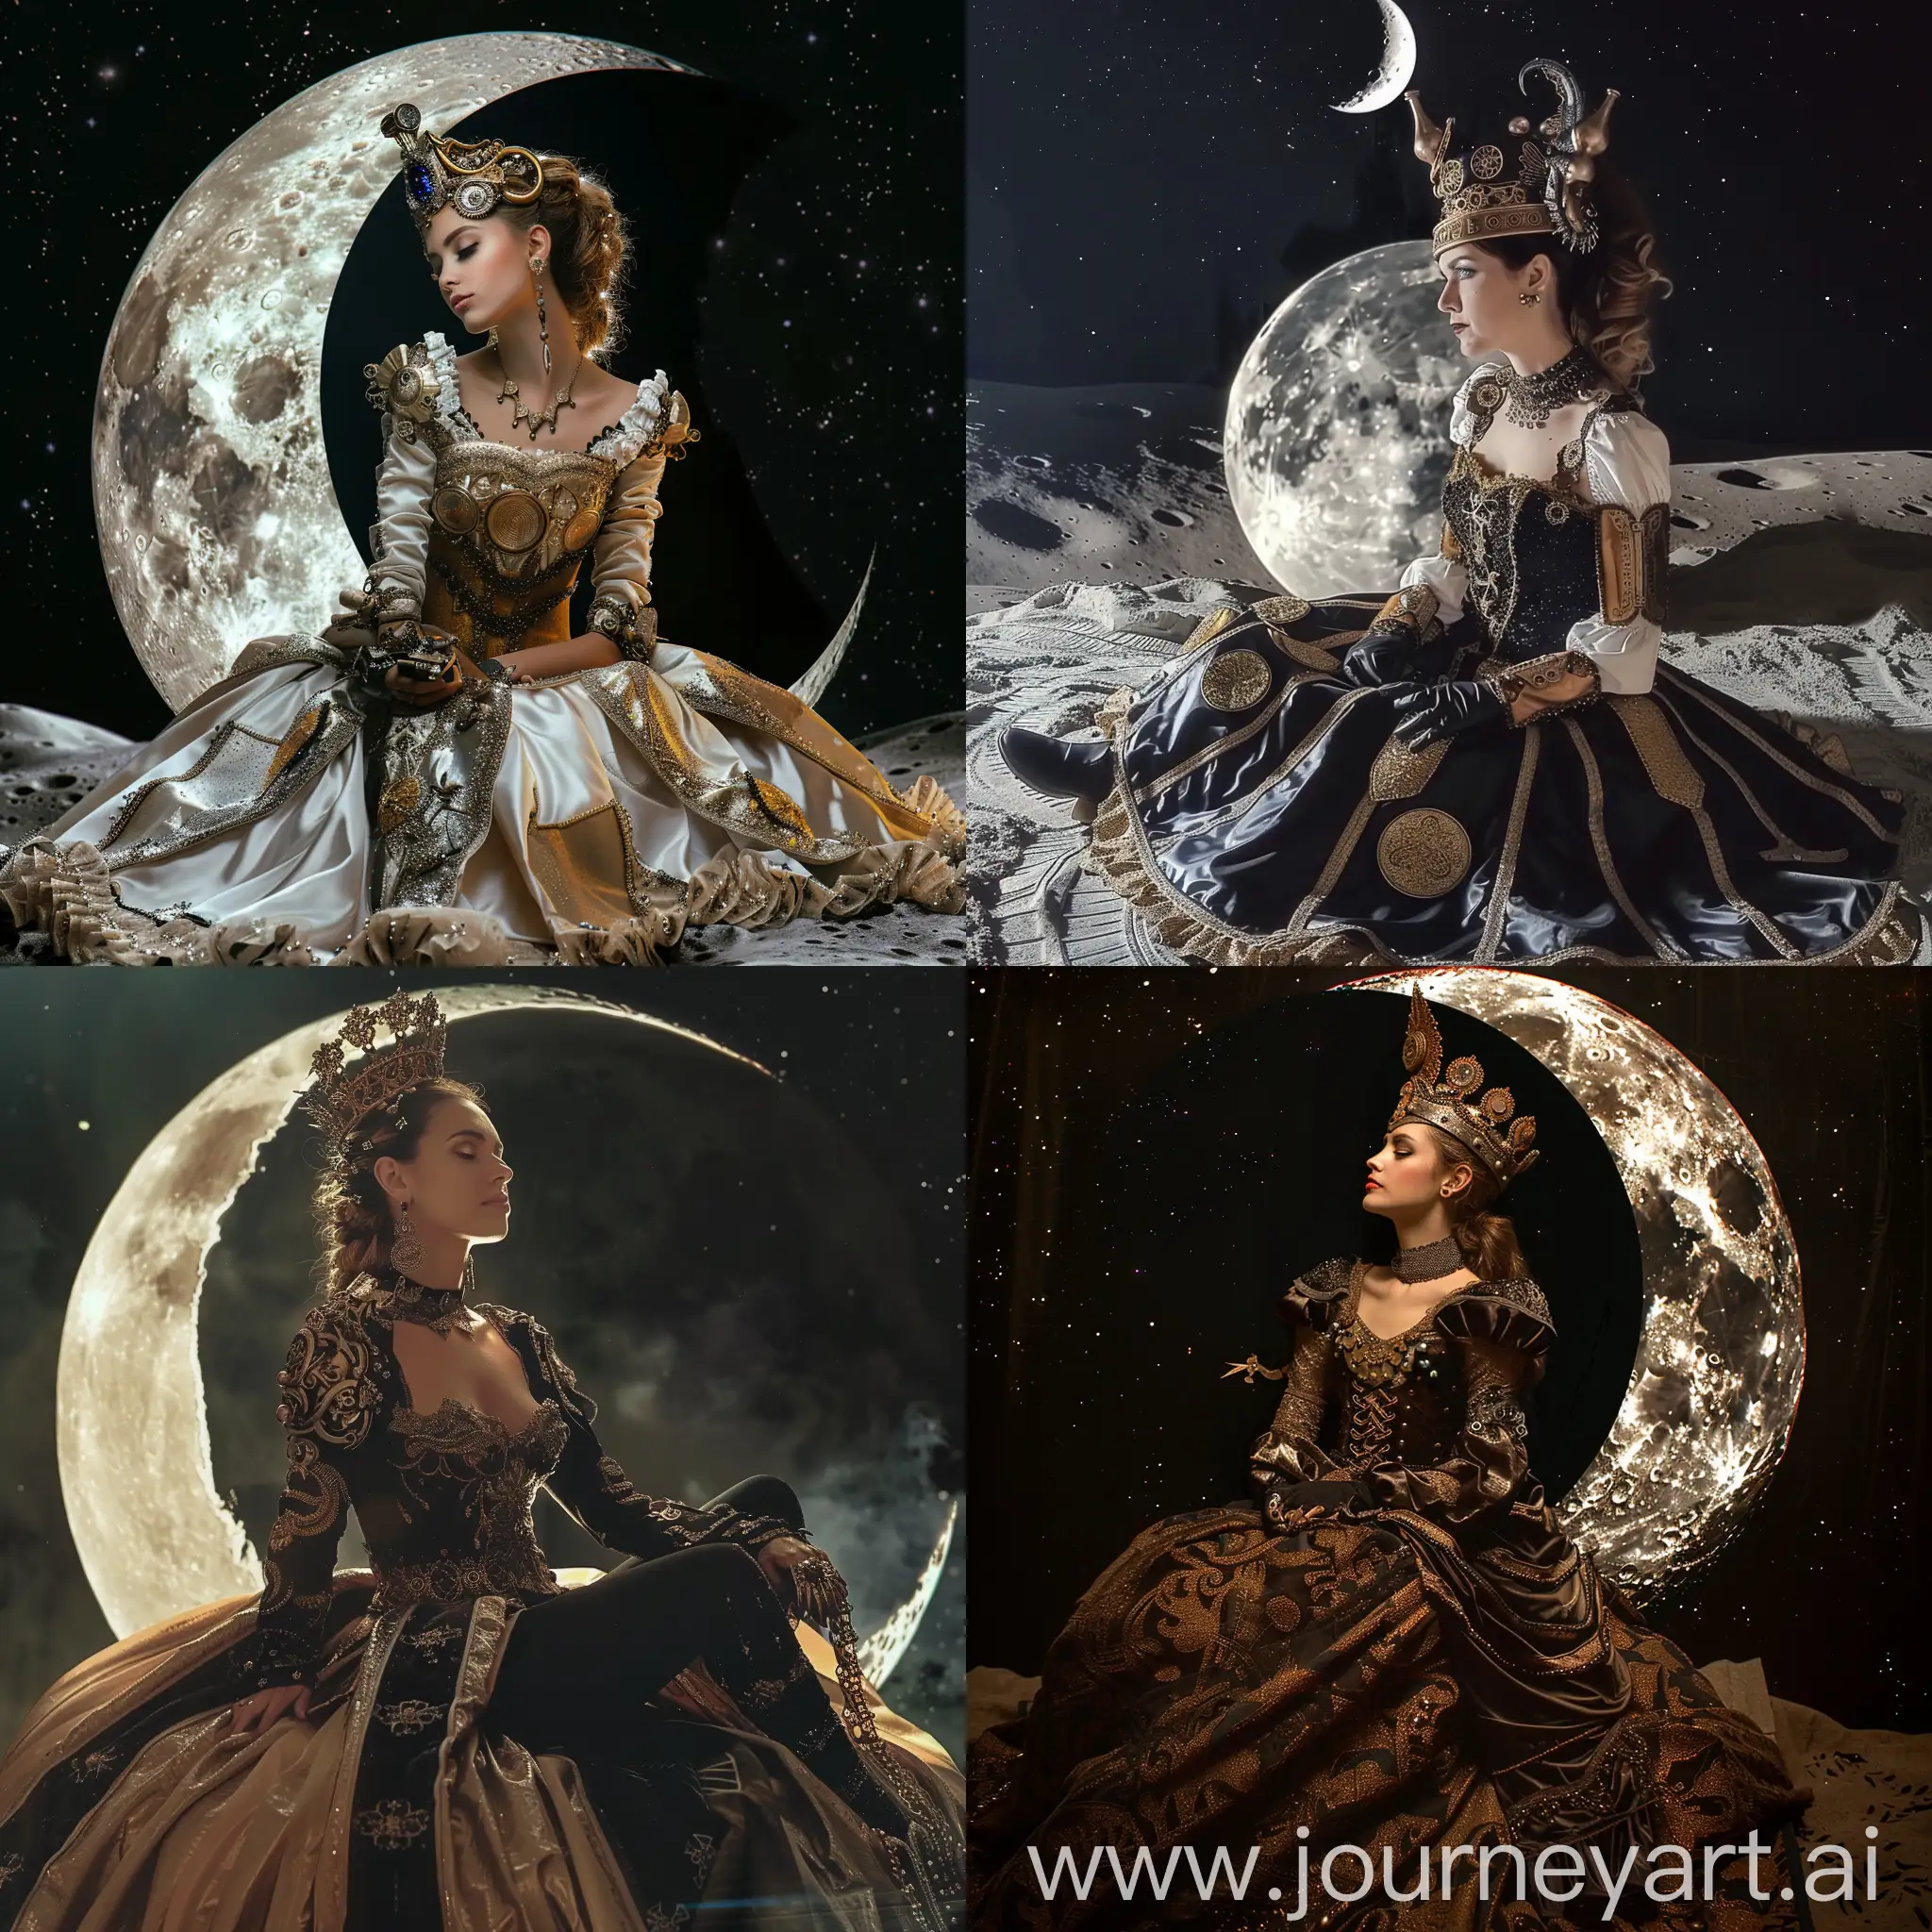 A beautiful medieval steampunk sci fi queen sitting on the moon